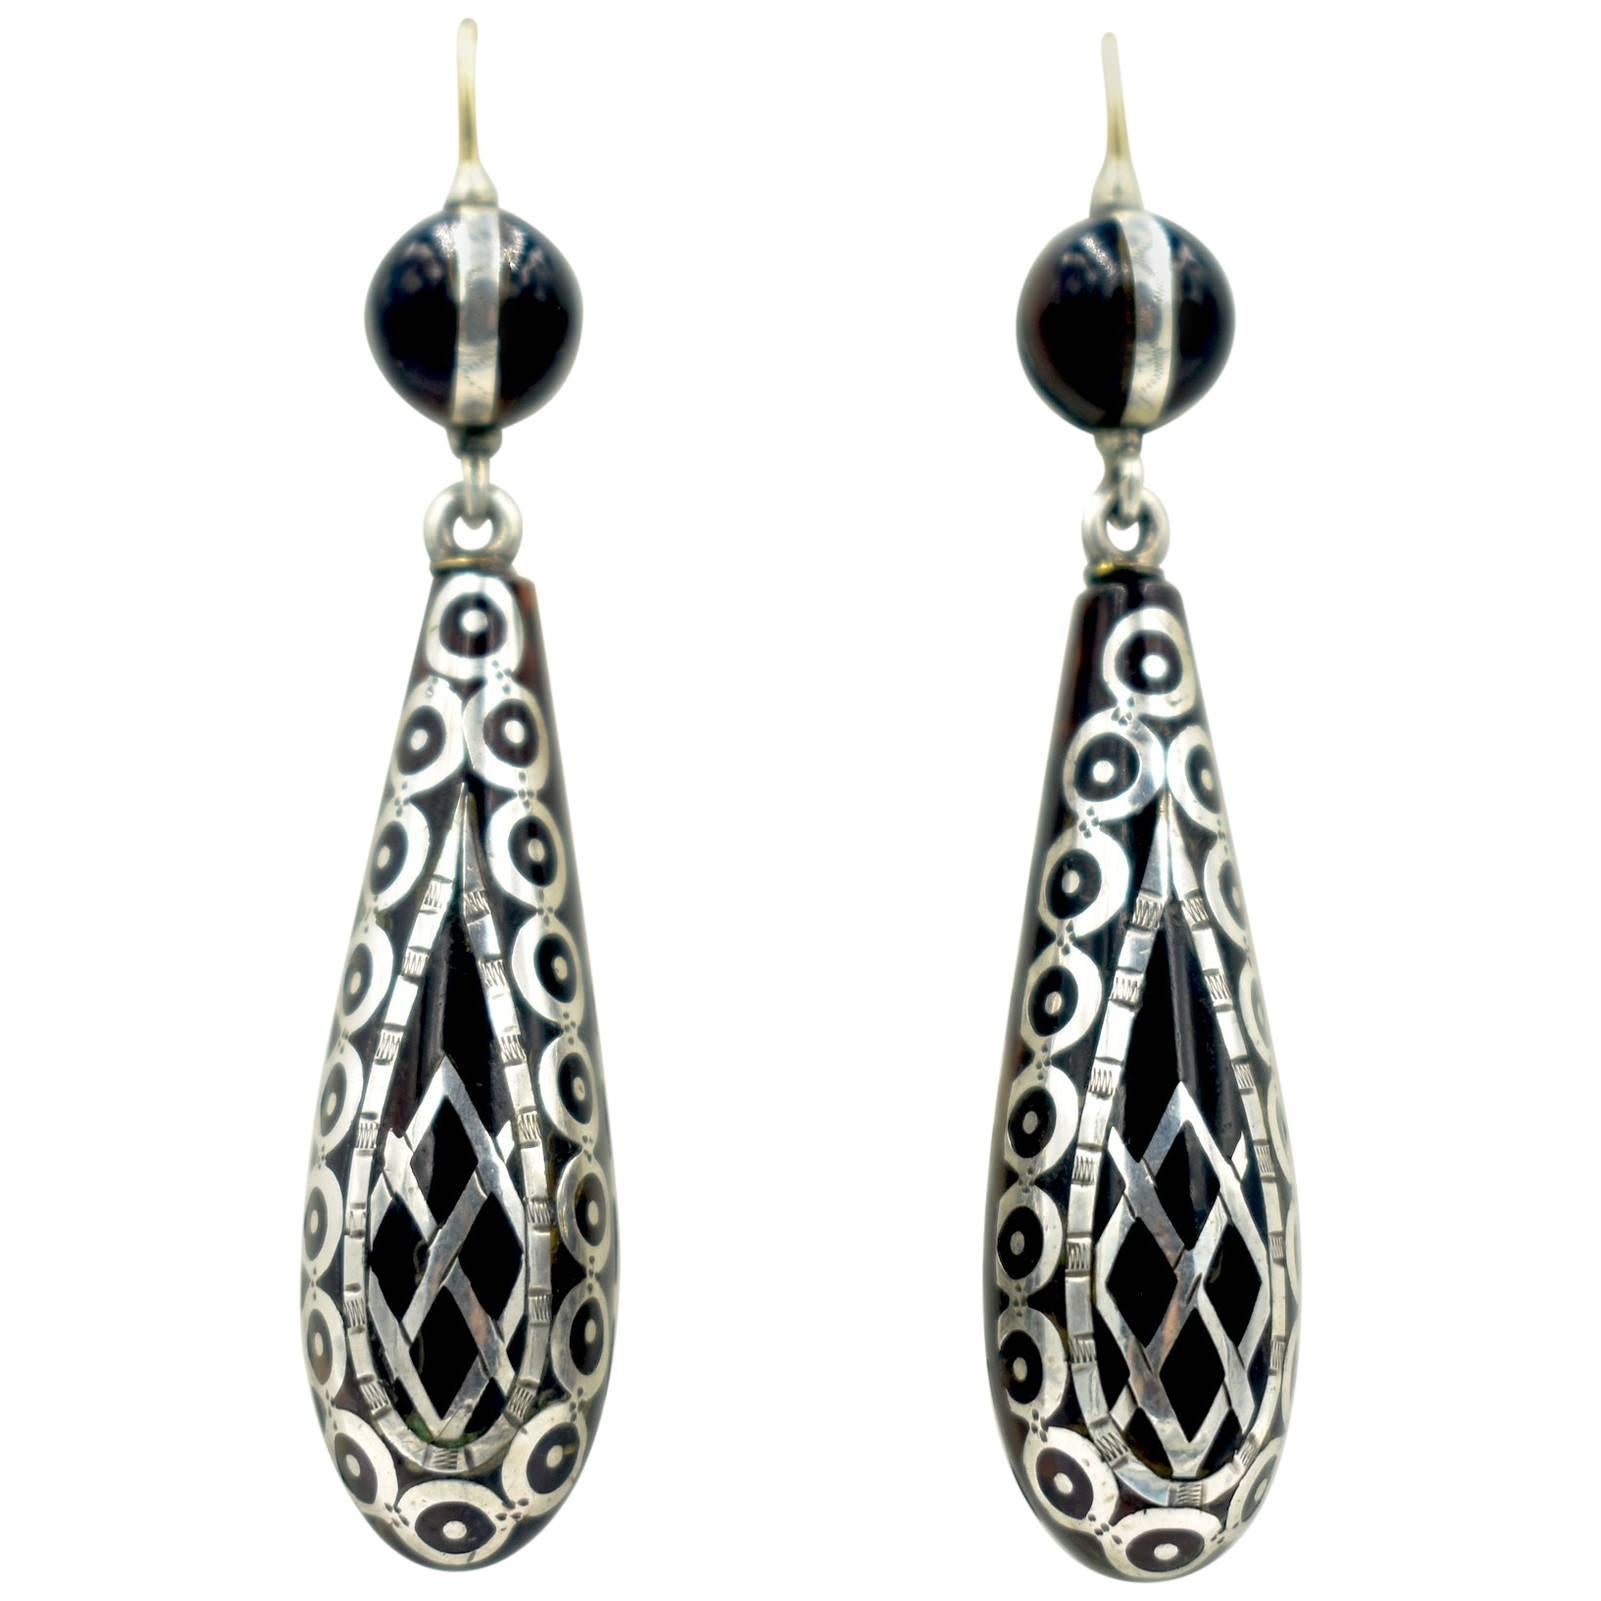 Antique Pique and Silver Earrings